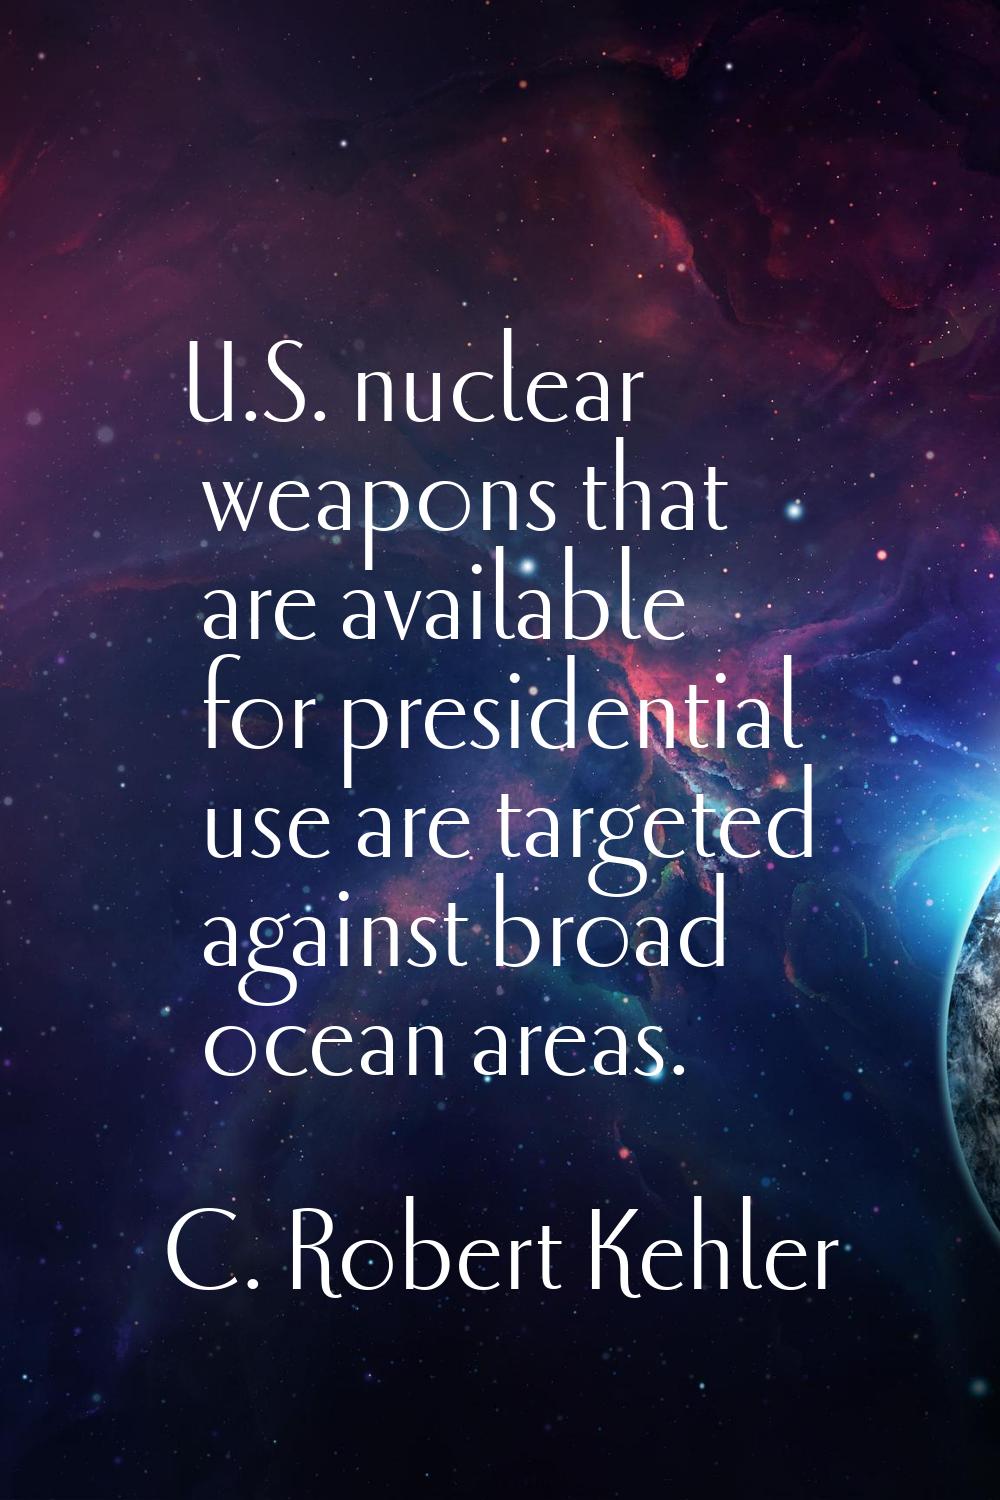 U.S. nuclear weapons that are available for presidential use are targeted against broad ocean areas